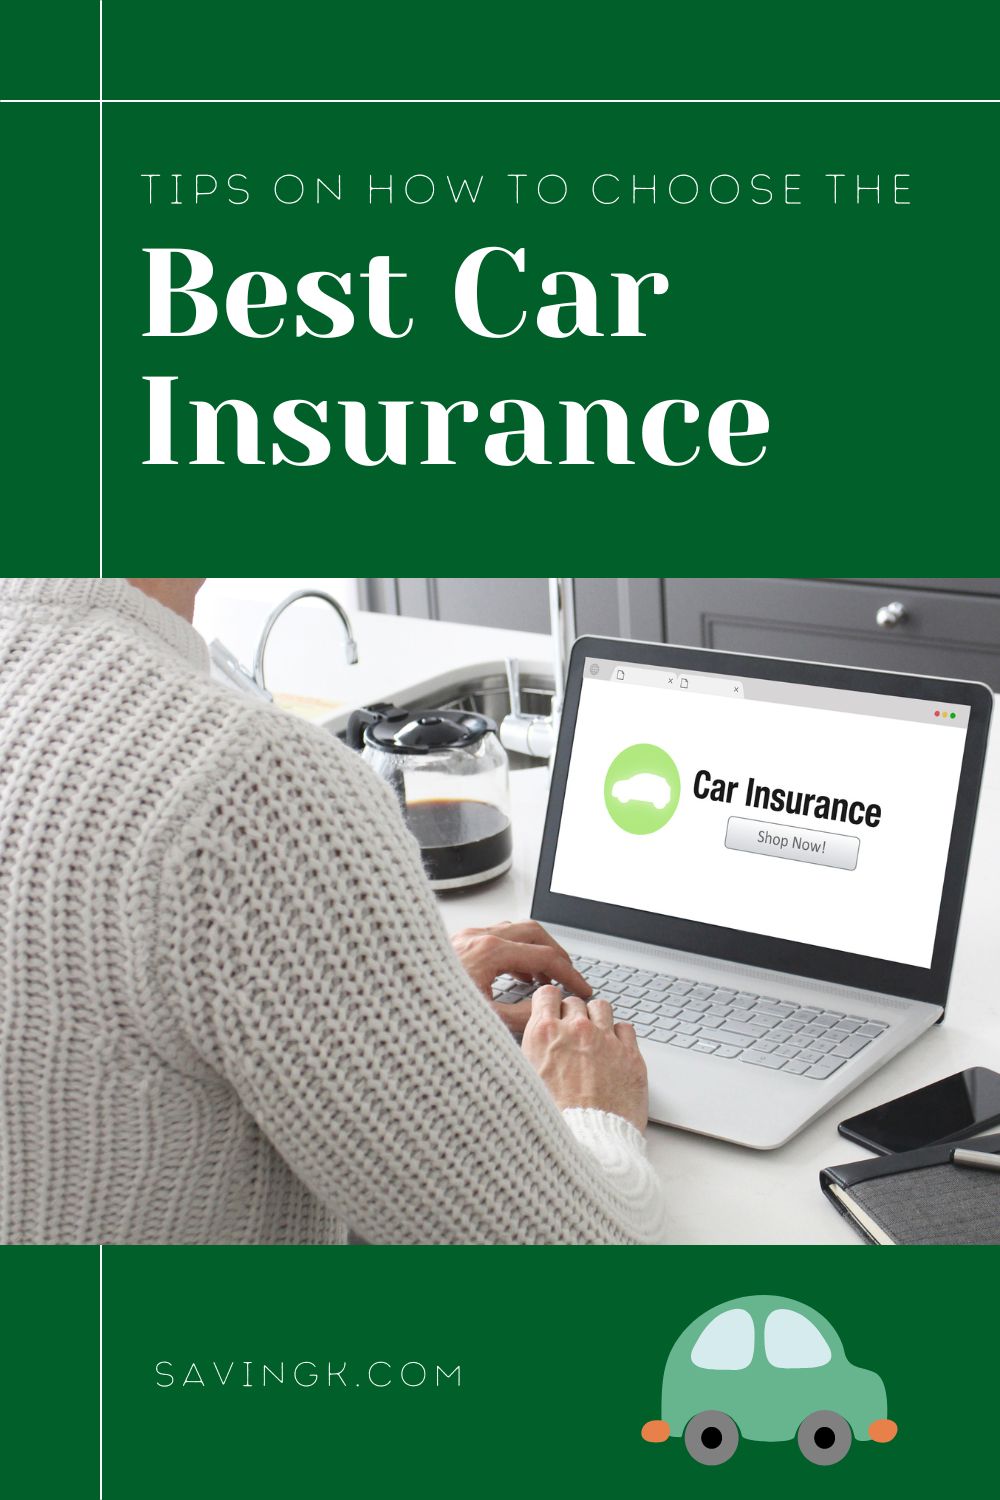 Tips on How to Choose the Best Car Insurance